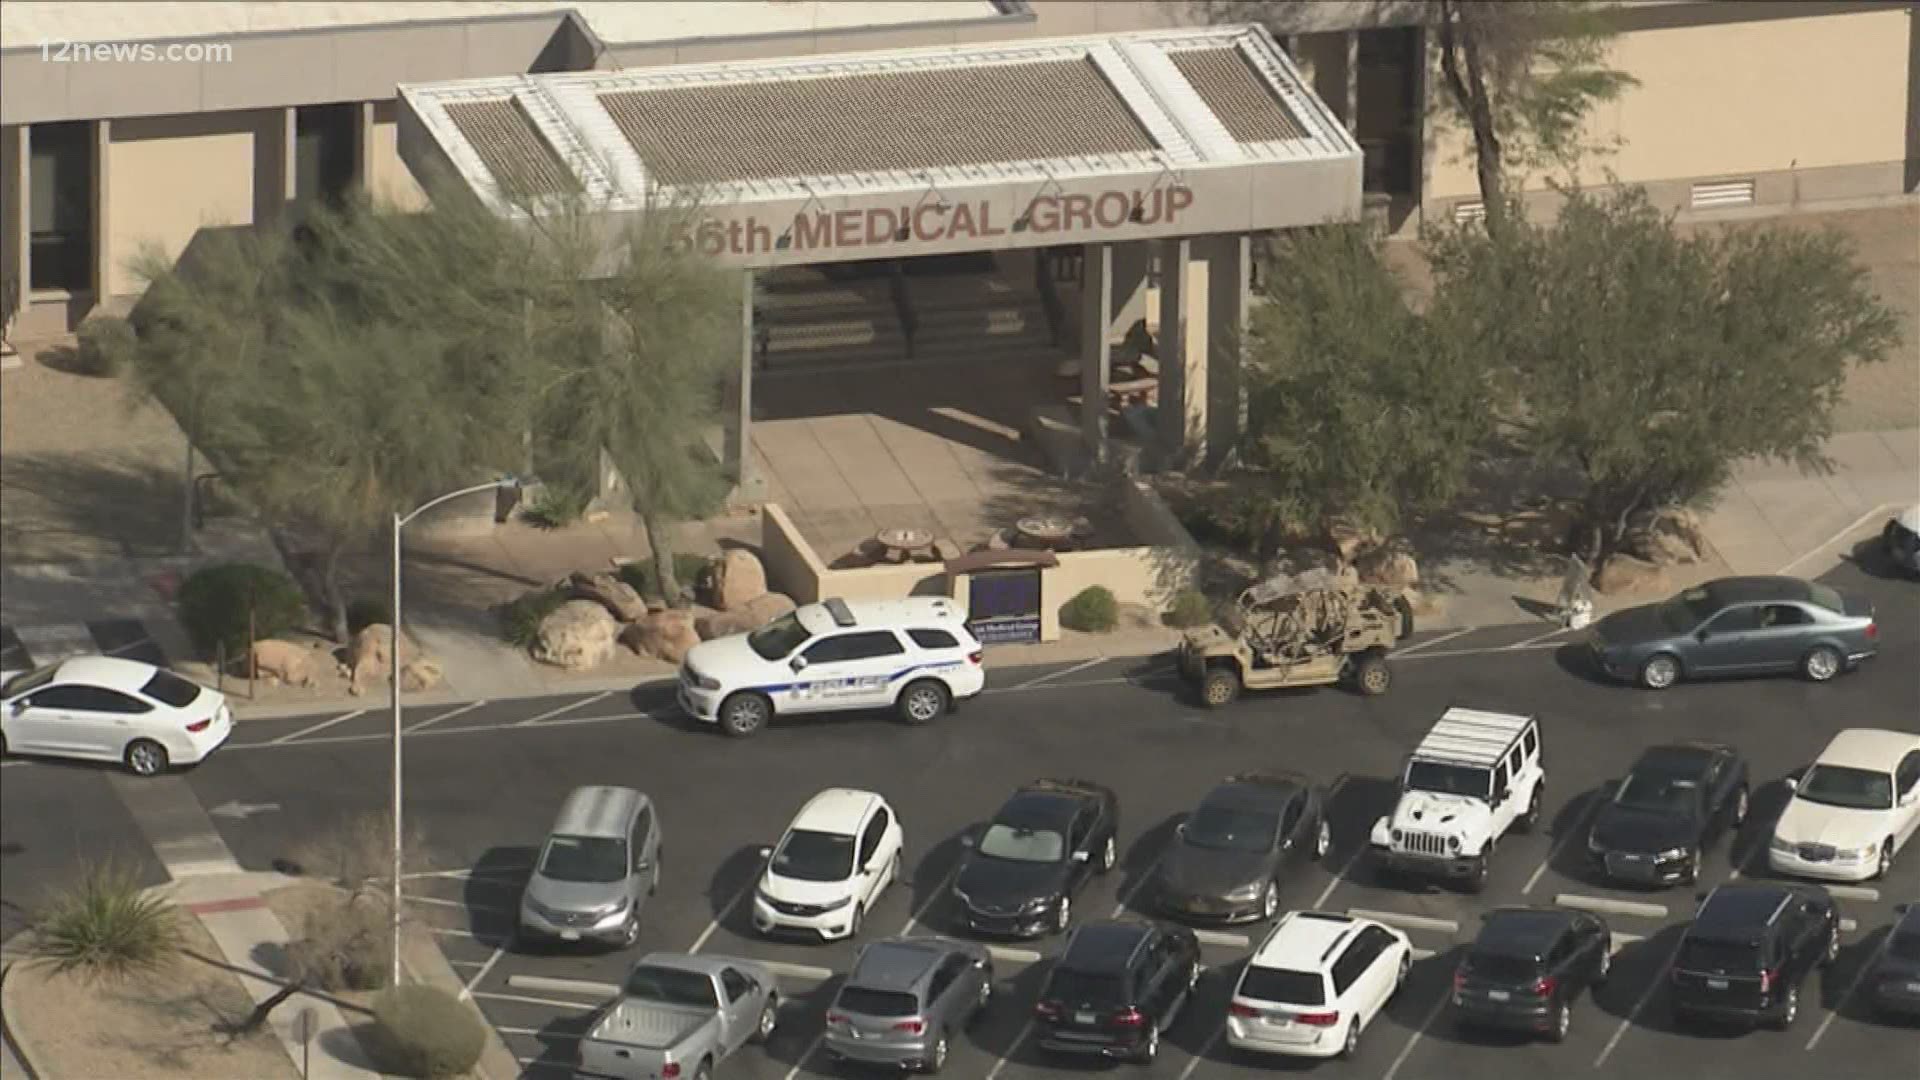 A spokesperson said there was a report of a person with a gun in the medical group, but no weapon was found. Find the latest info on this incident on 12news.com.